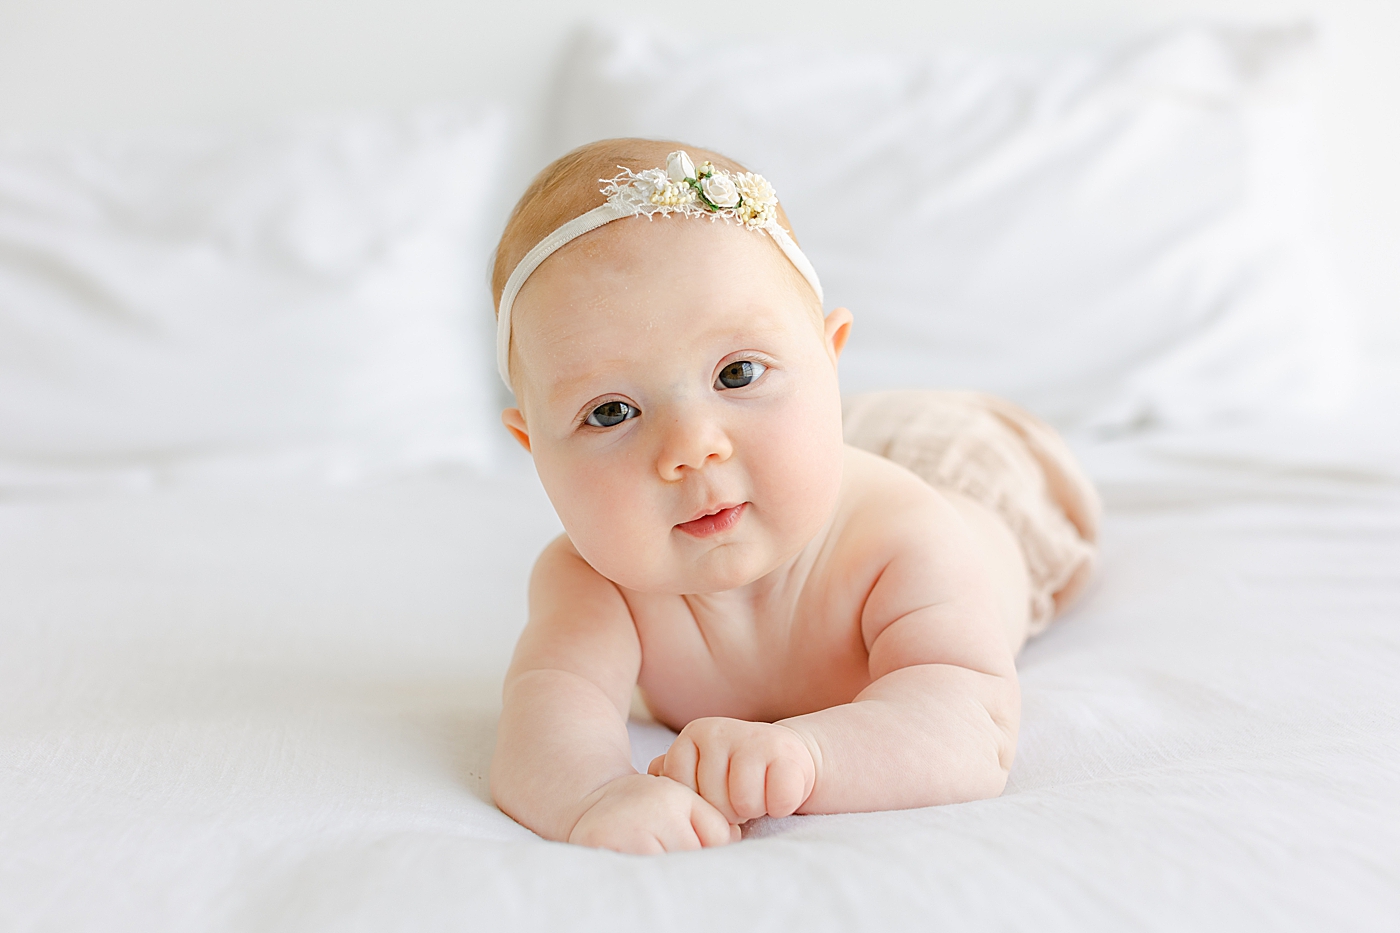 Baby girl on her tummy during her One Year Milestone Collection | Image by Sana Ahmed Photography